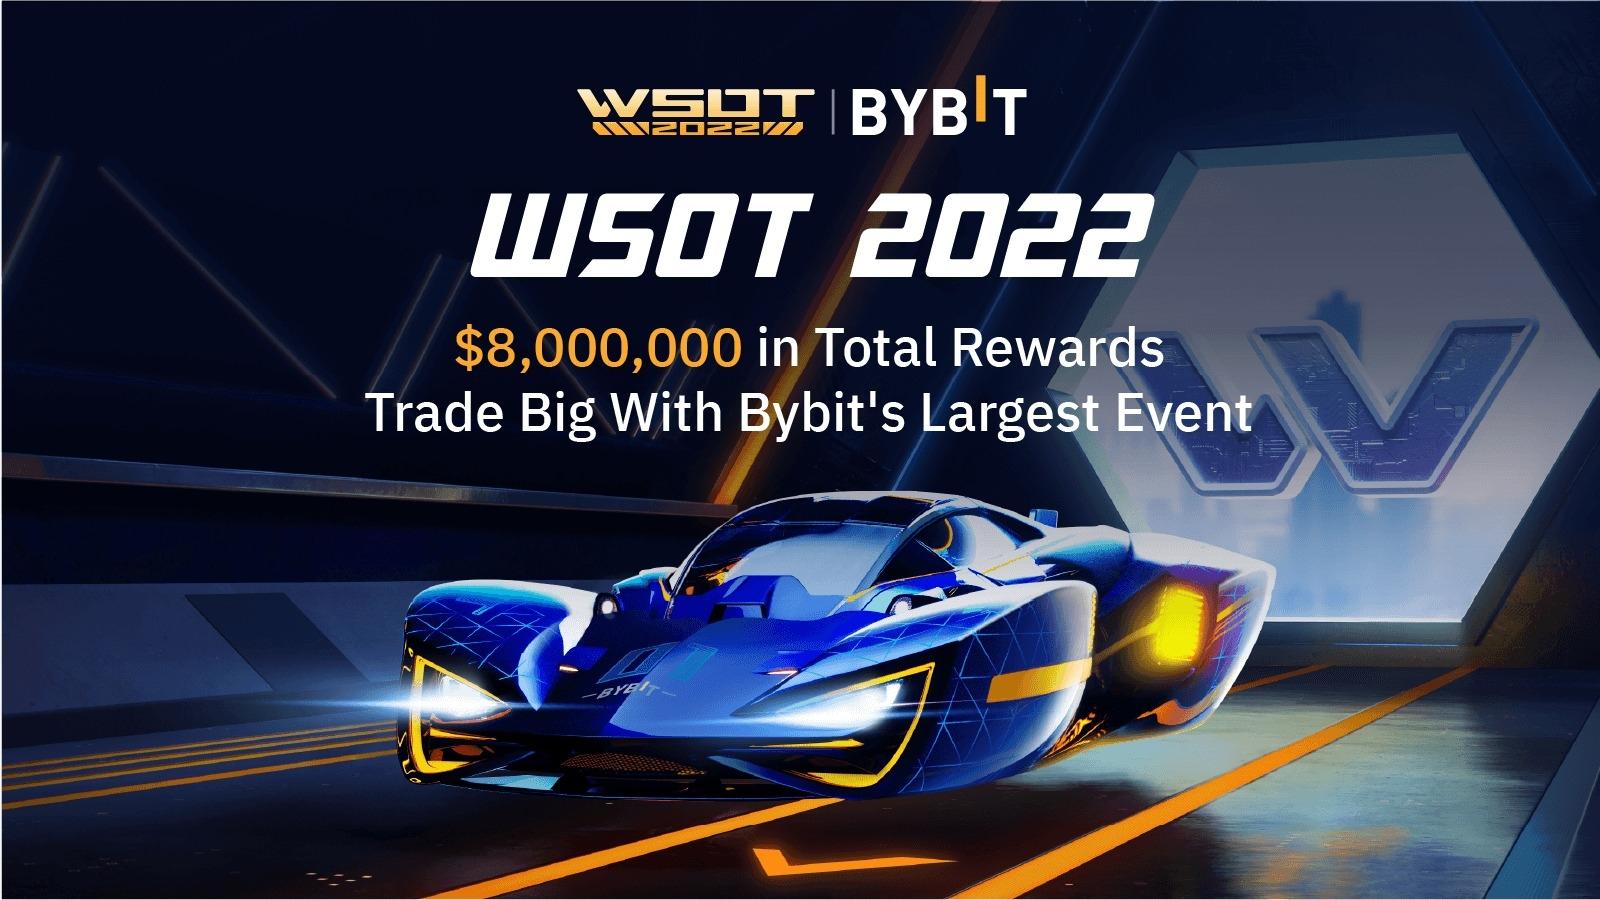 How to Win Big at WSOT 2022: Bybit Affiliate Tips #1